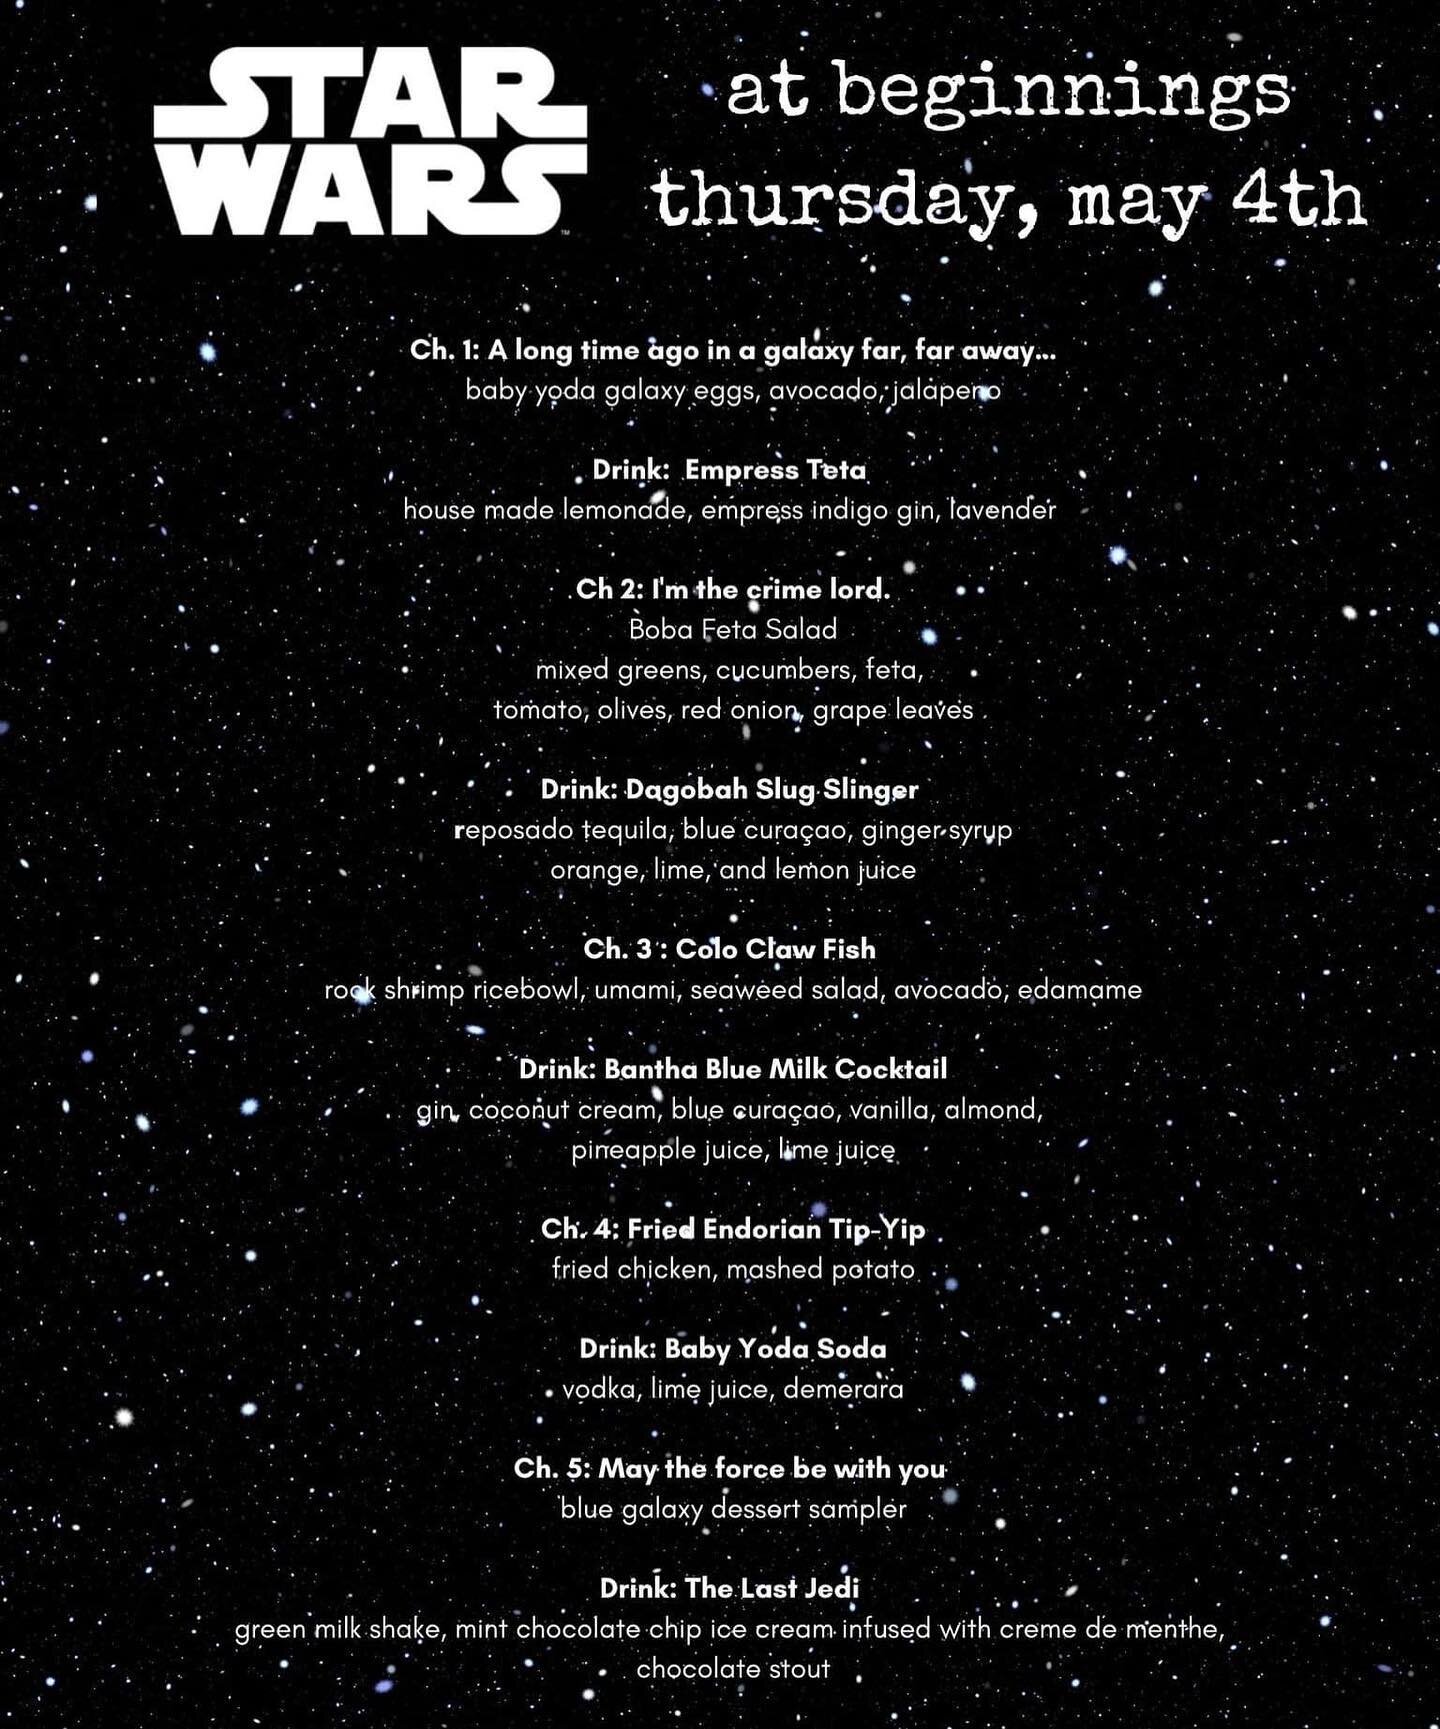 Join us on May 4th for five courses and cocktails based on #starwars. Bring the kids, we&rsquo;re also offering a $25, three course tasting for them! Reserve: 516-239-7483 #maythe4thbewithyou #babyyoda